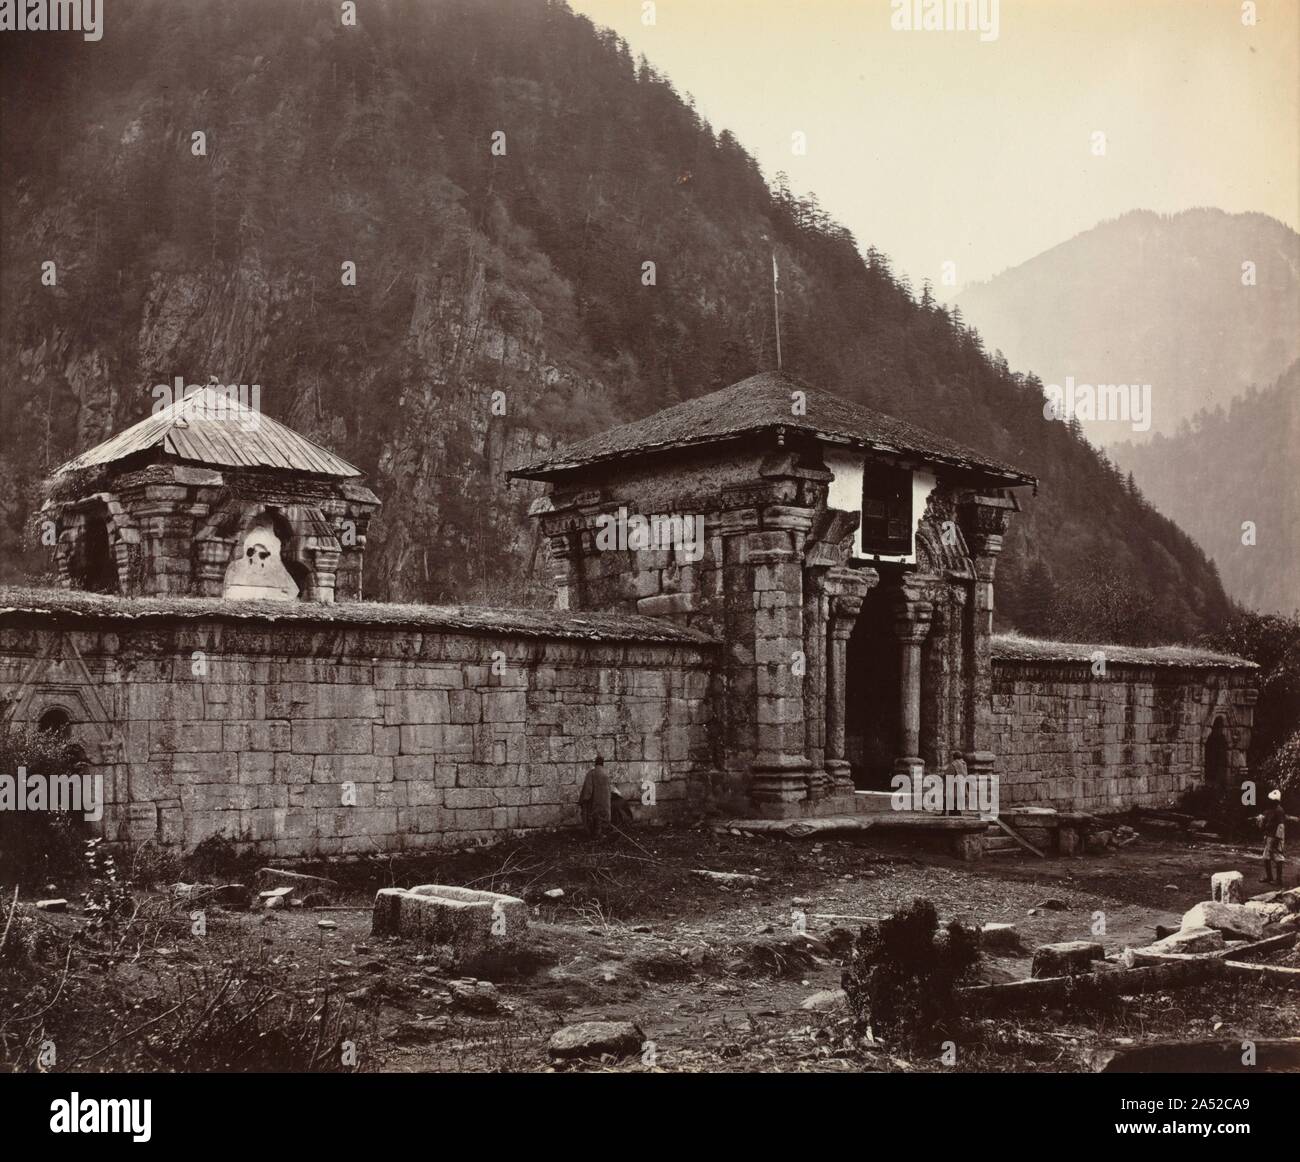 Temple at Naveshera, Kashmir, India, 1864. One of the most important British expeditionary photographers, Samuel Bourne was propelled by his great desire to travel to lovely, remote locations and to record images of what he considered picturesque. From 1863 to 1869, he worked widely in India, making three major expeditions to the Himalayas. This exquisite photograph of the decaying Temple of Naveshera was taken on his nine-month, second journey to this stunning, mountainous terrain. He balanced the ordered, constructed architectural forms with glimpses of the majestic natural landscape. Bourne Stock Photo